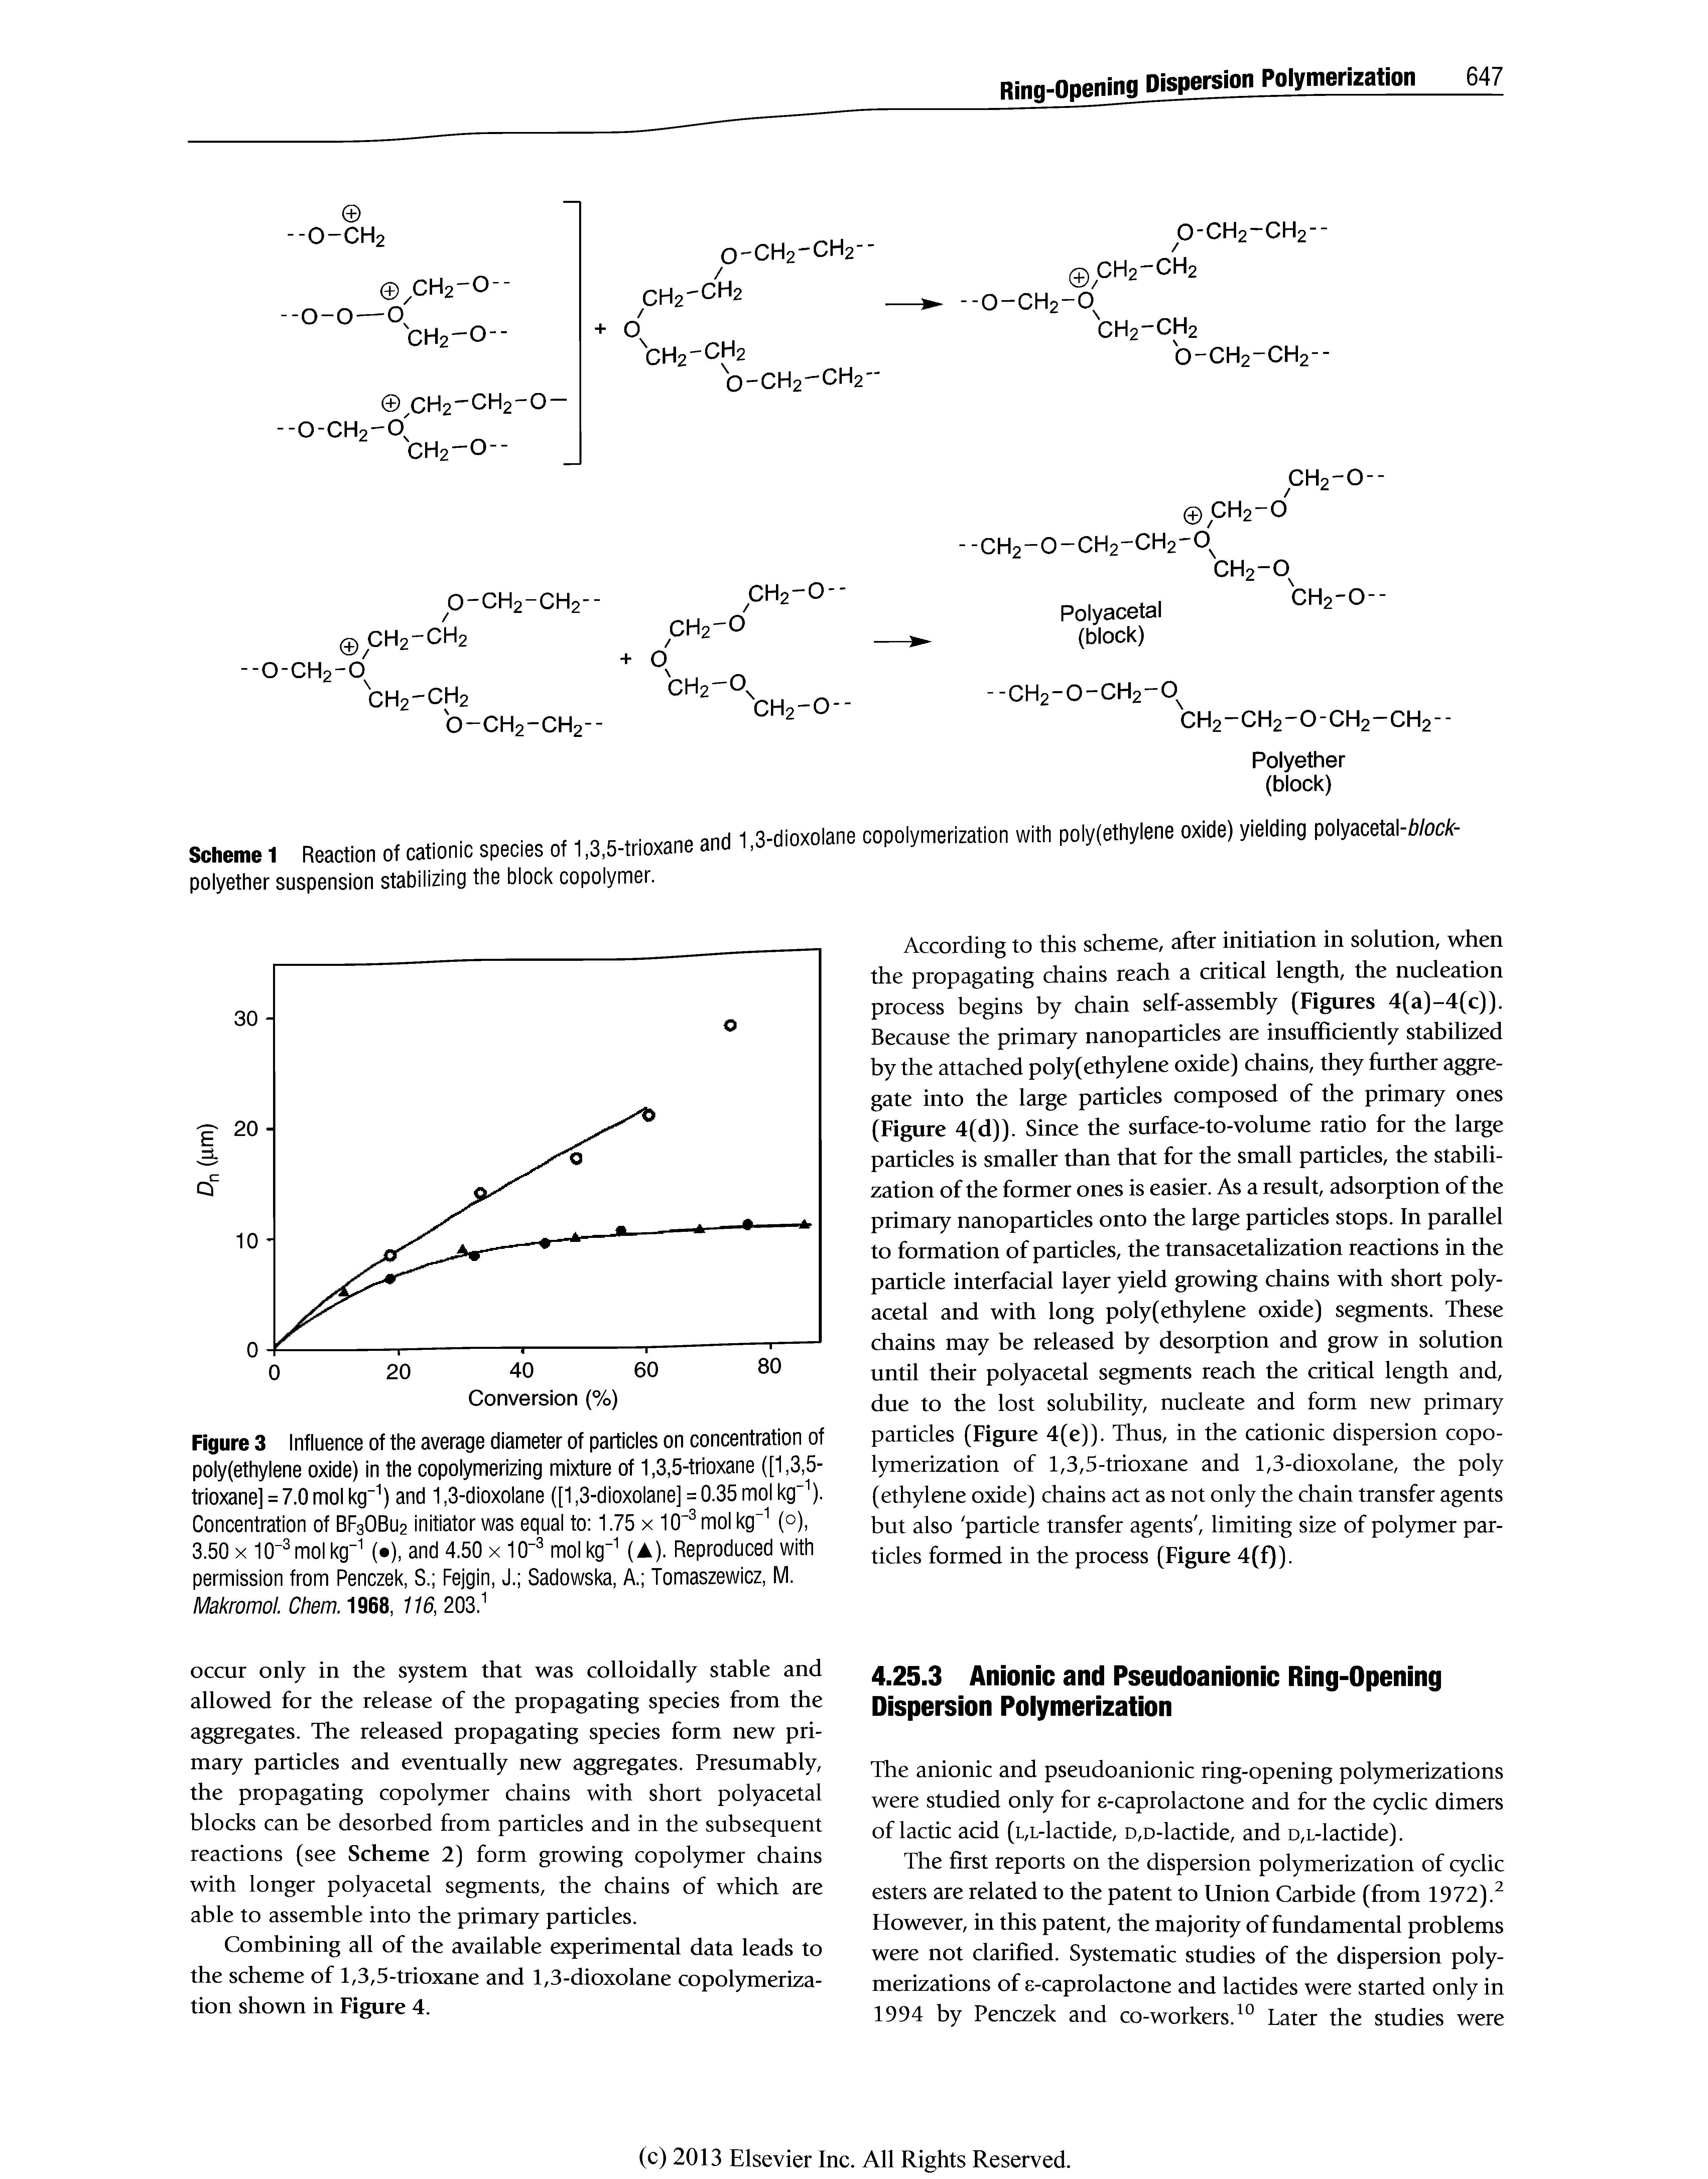 Figure 3 Influence of the average diameter of particles on concentration of poly(ethylene oxide) in the copolymerizing mixture of 1,3,5-trioxane ([1,3,5-trioxane] = 7.0 mol kg" ) and 1,3-dioxolane ([1,3-dioxolane] = 0.35 mol kg" ). Concentration of BF3OBU2 initiator was equal to 1.75 x 10 mol kg " (o), 3.50 X 10 mol kg"" ( ), and 4.50 x 10" mol kg"" (A). Reproduced with permission from Penczek, S. Fejgin, J. Sadowska, A. Tomaszewicz, M. Makromol. Chem. 1968, 116, 203." ...